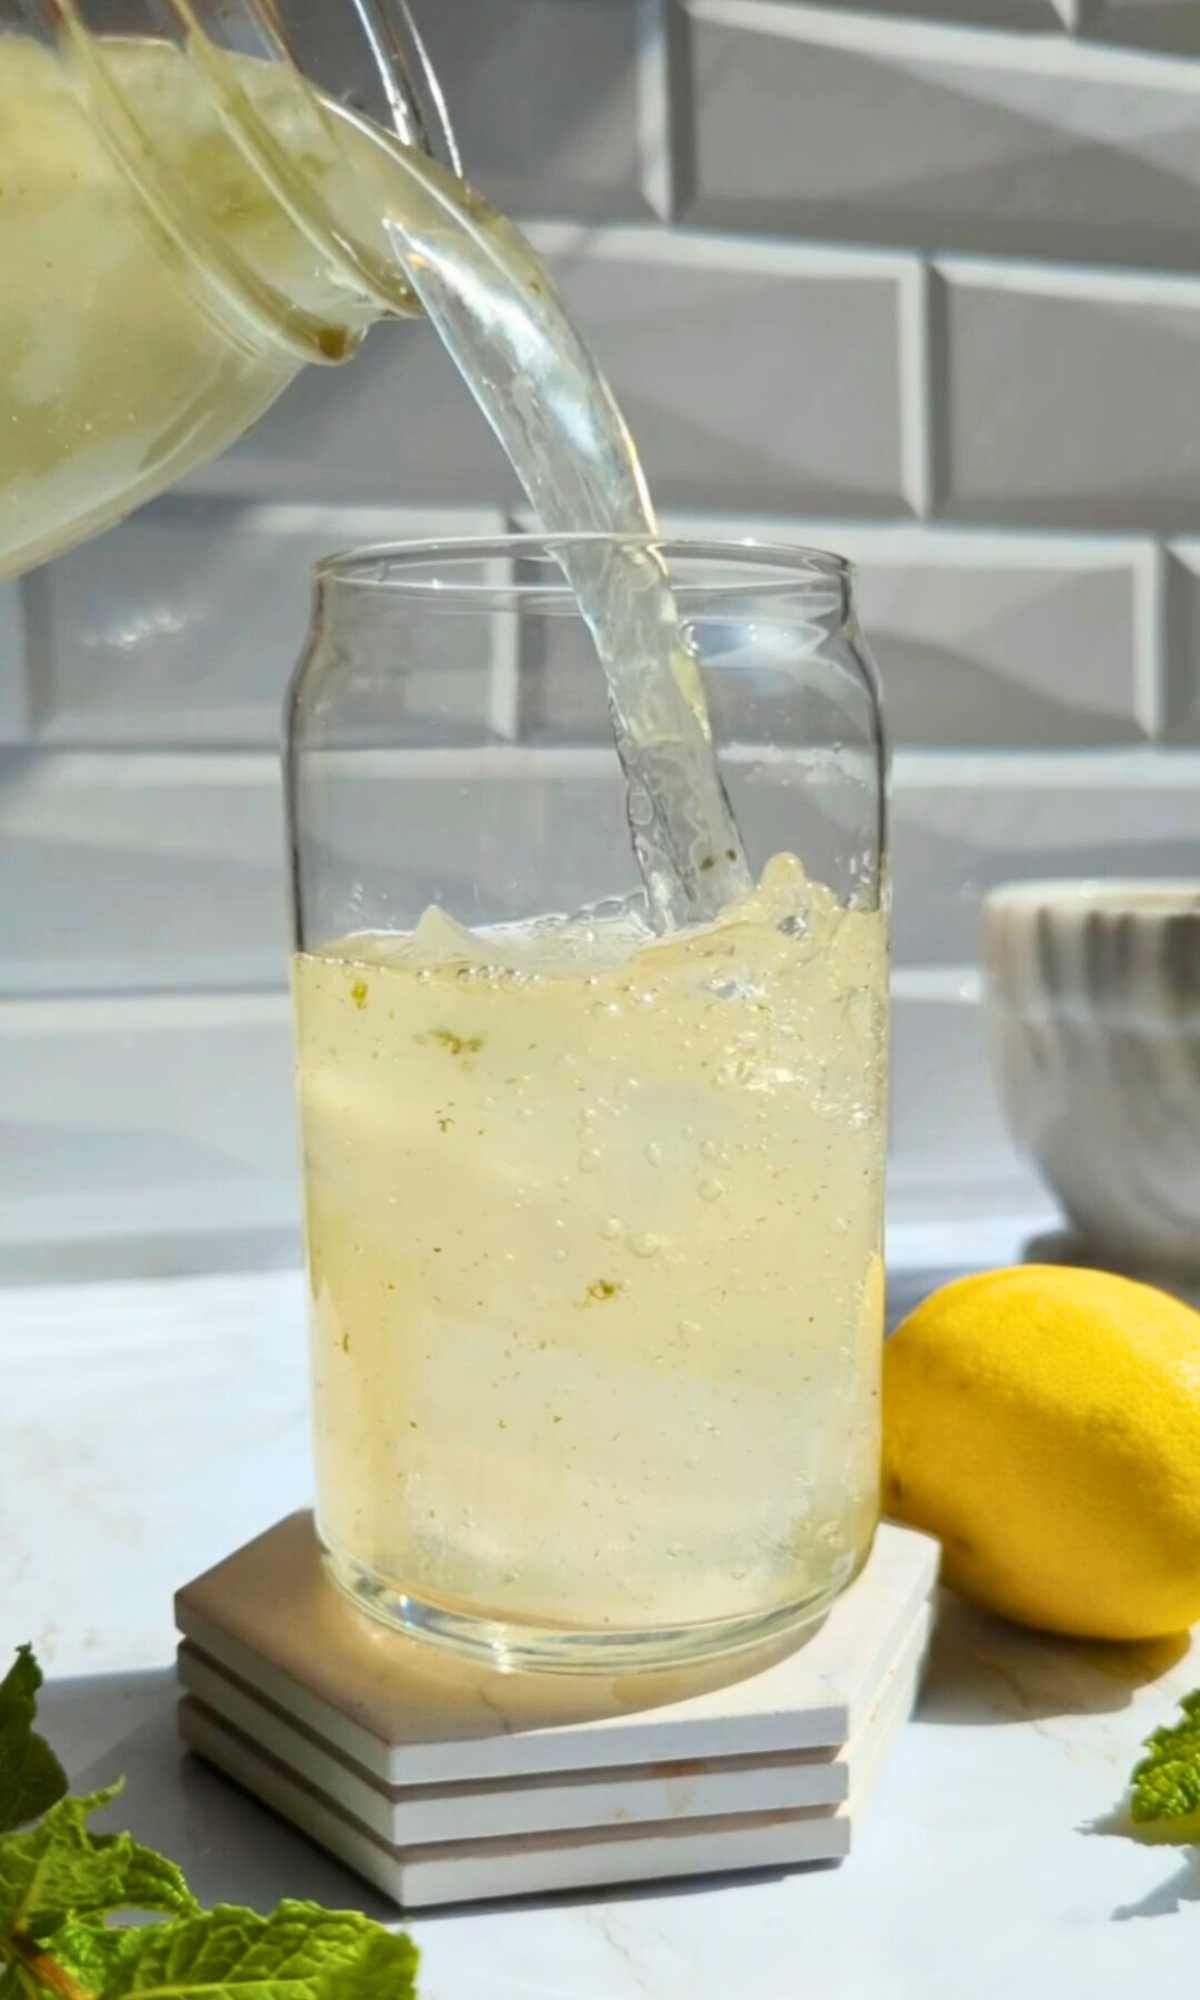 fresh homemade mint lemonade being poured into a glass over ice cubes on a hot summer day.